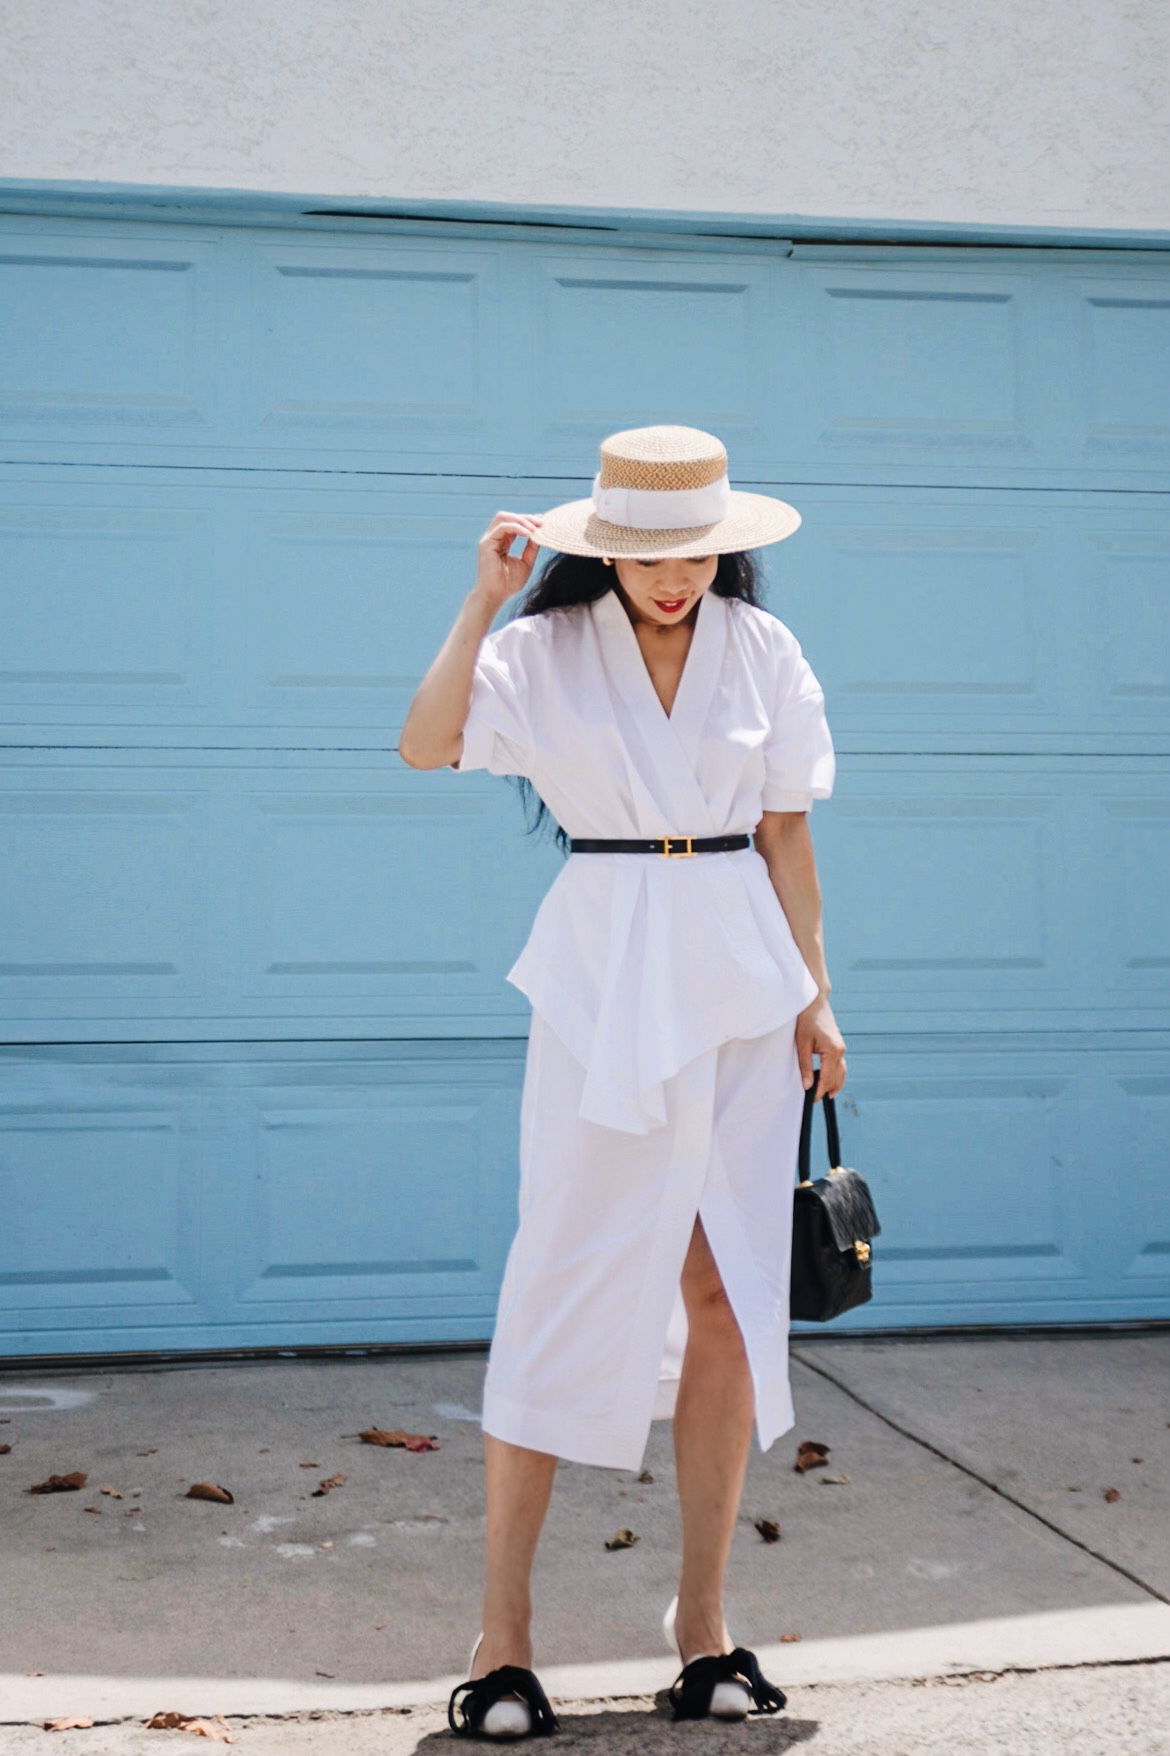 The Summer White Dress . . . Can Be Formal, Too!